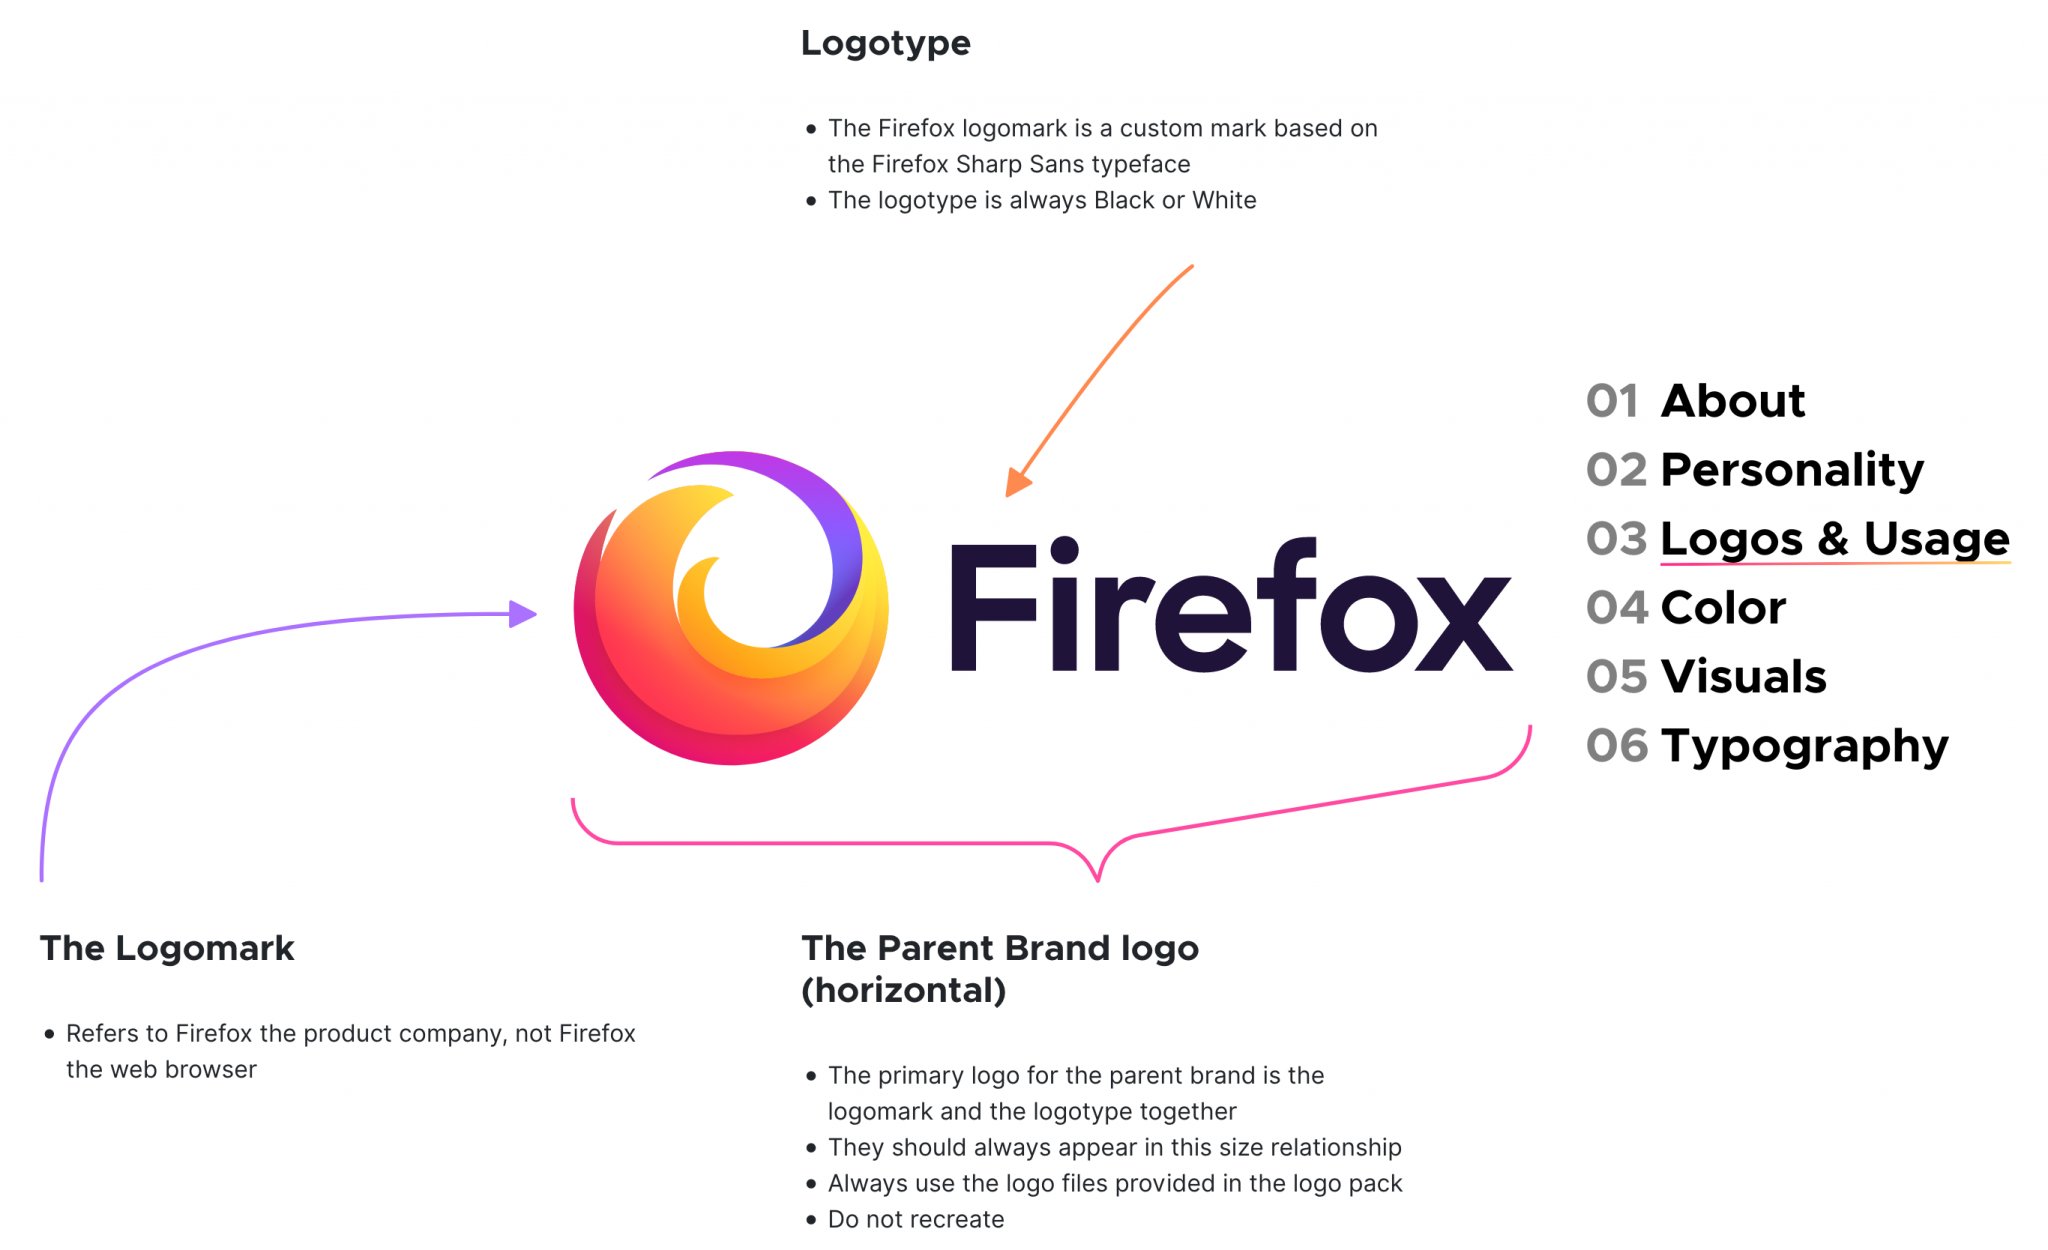 Firefox parent brand logo and usage from their website